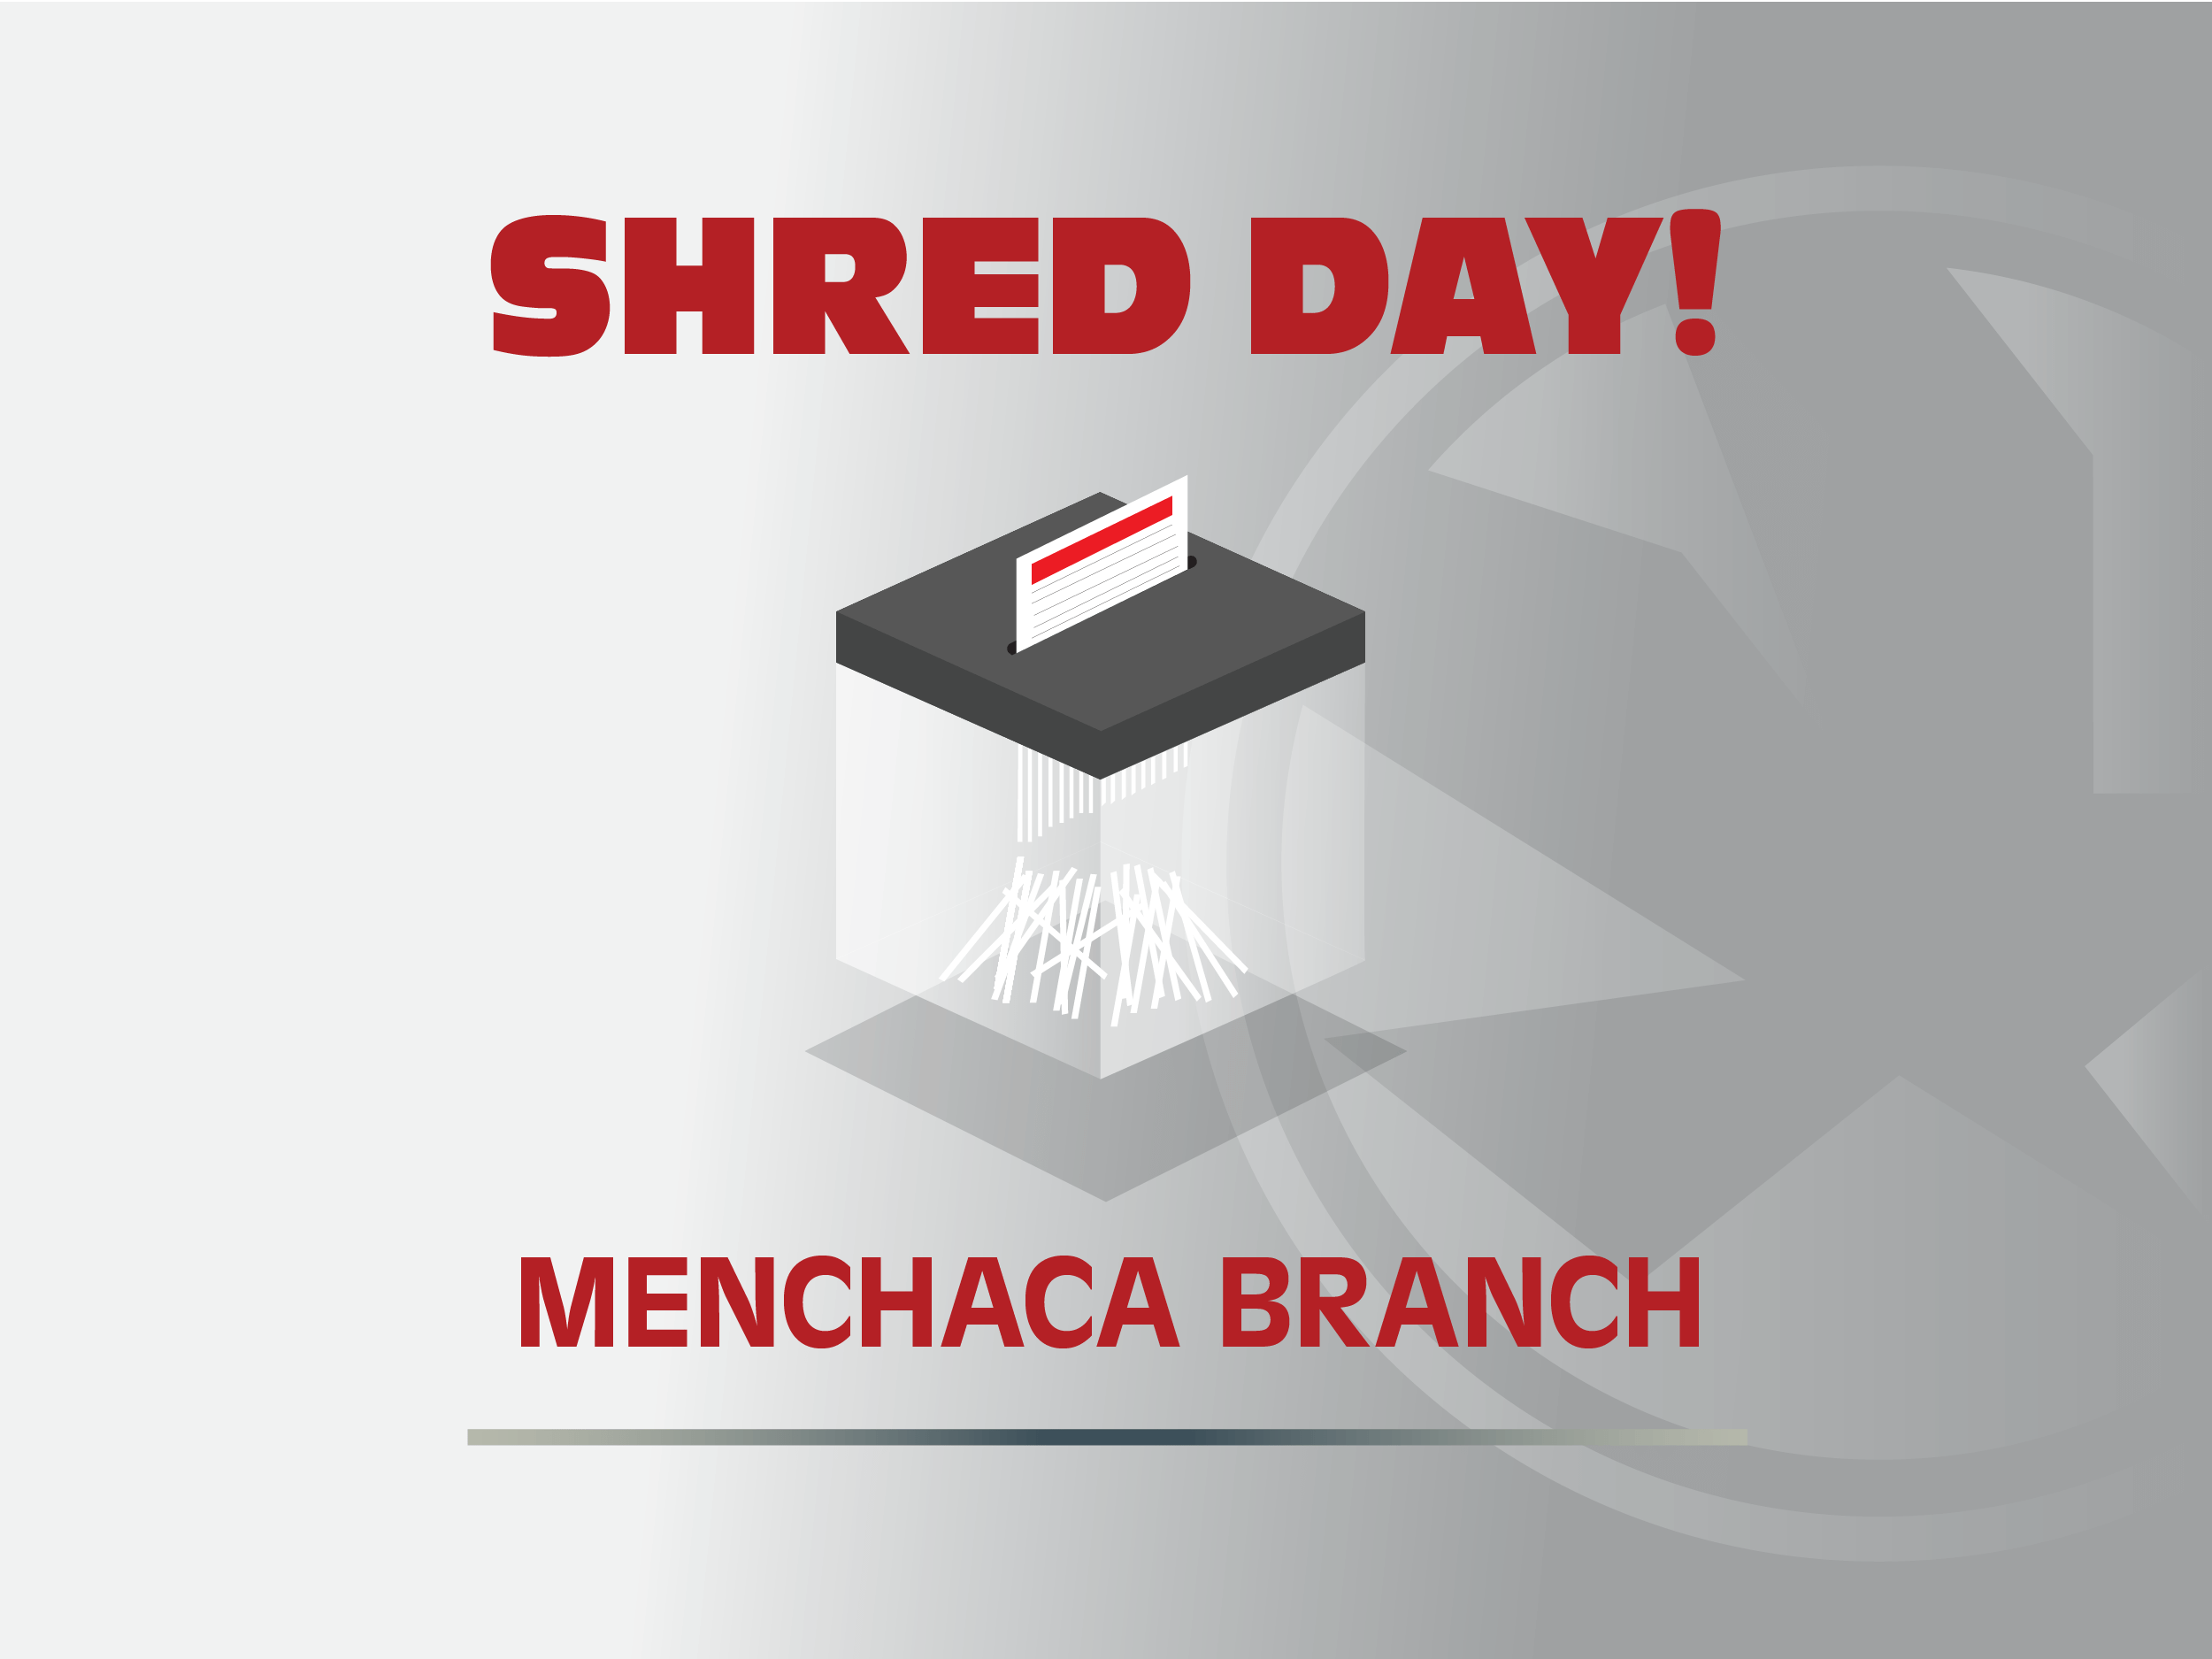 Shred Day graphic